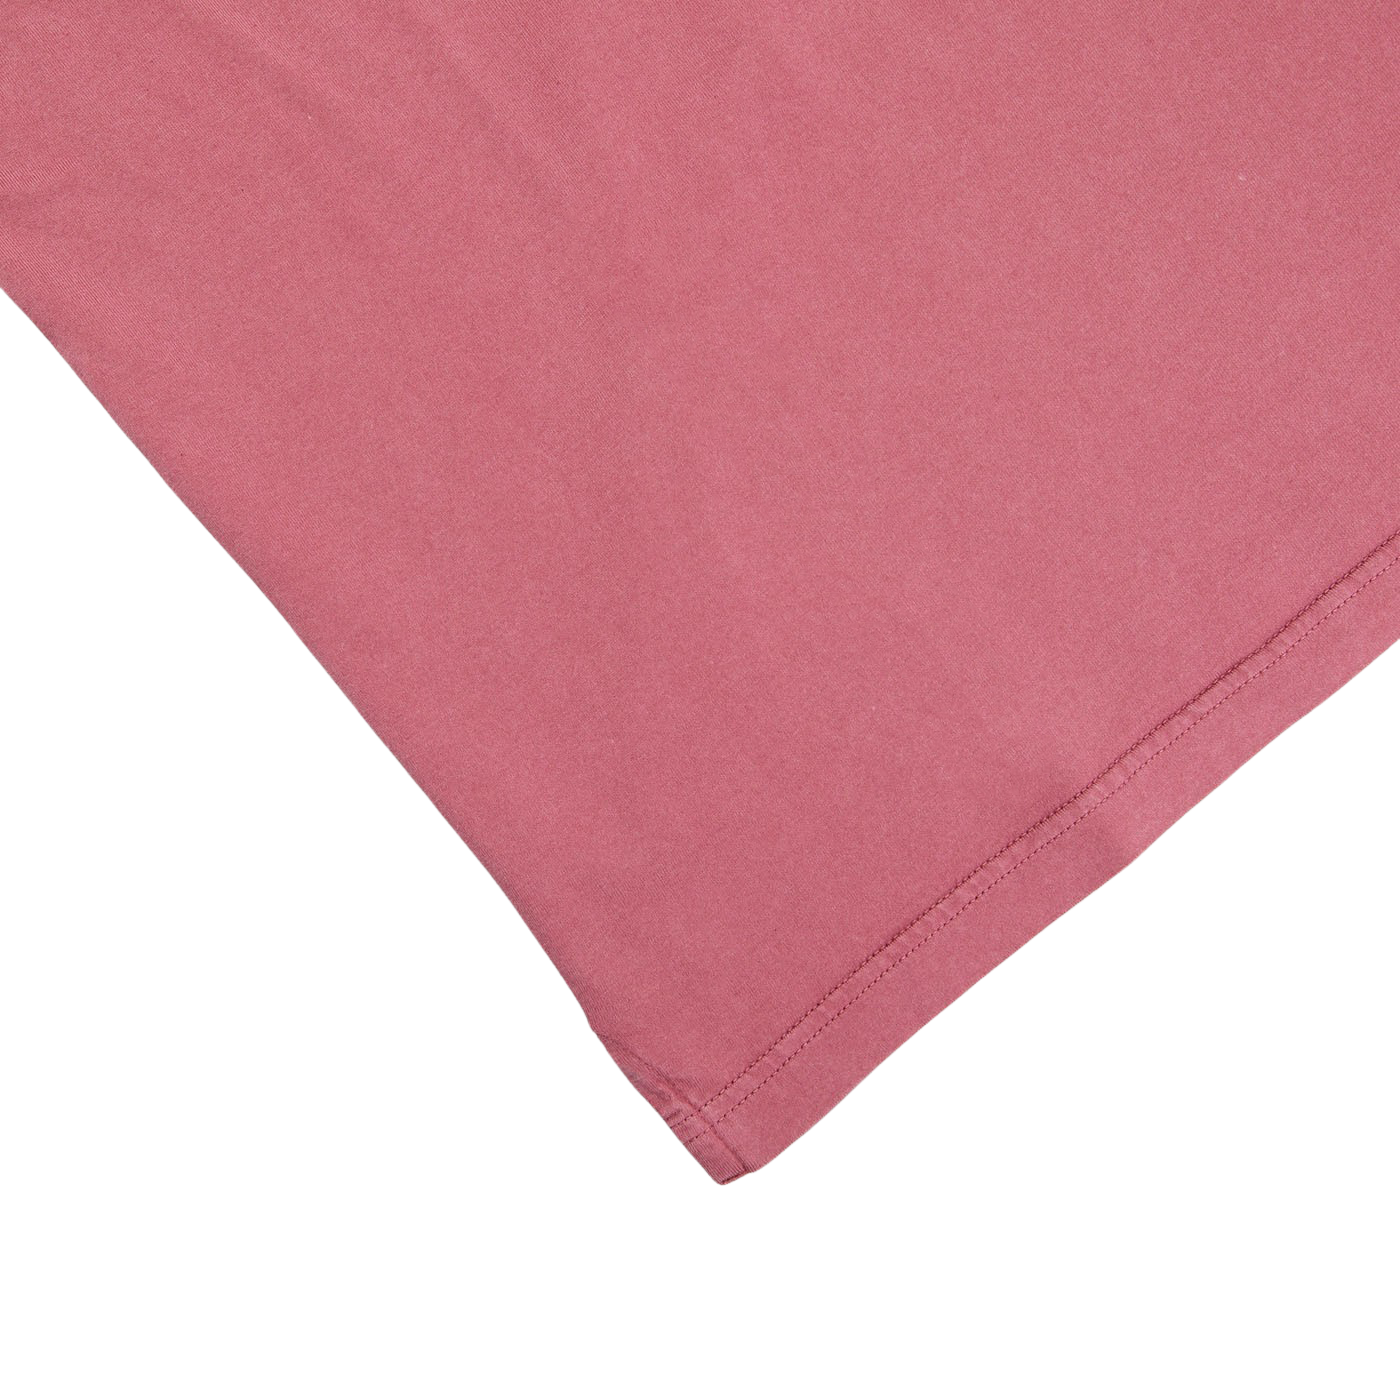 A Fedeli Washed Raspberry Organic Cotton Polo Shirt on a white surface.